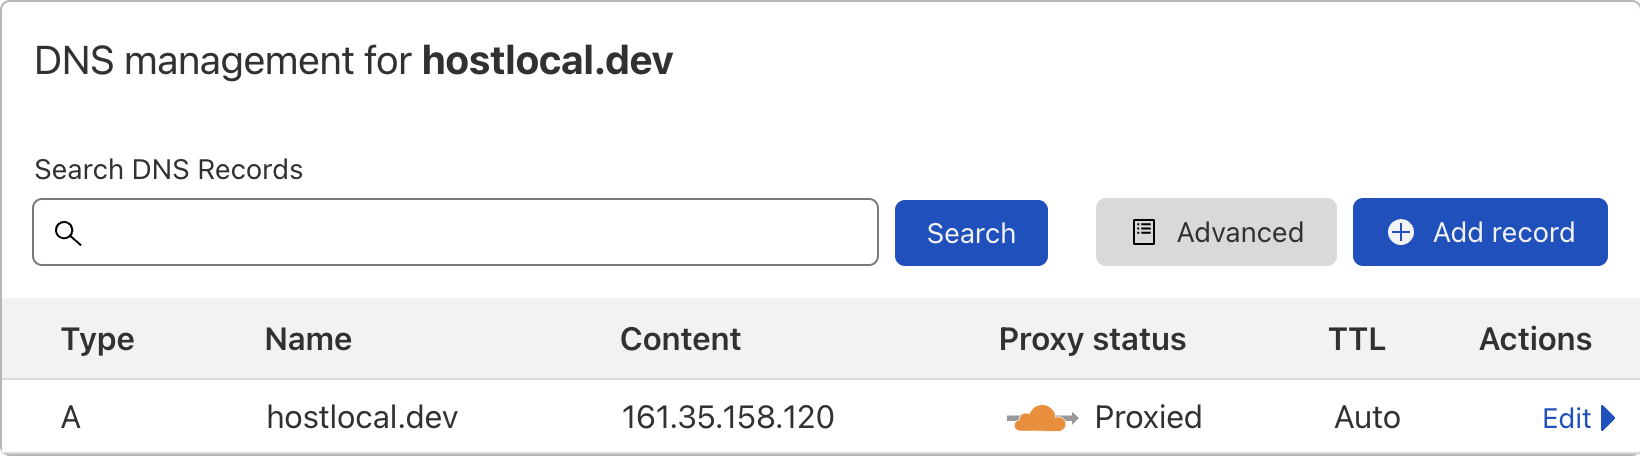 Cloudflare DNS settings with proxying turned on